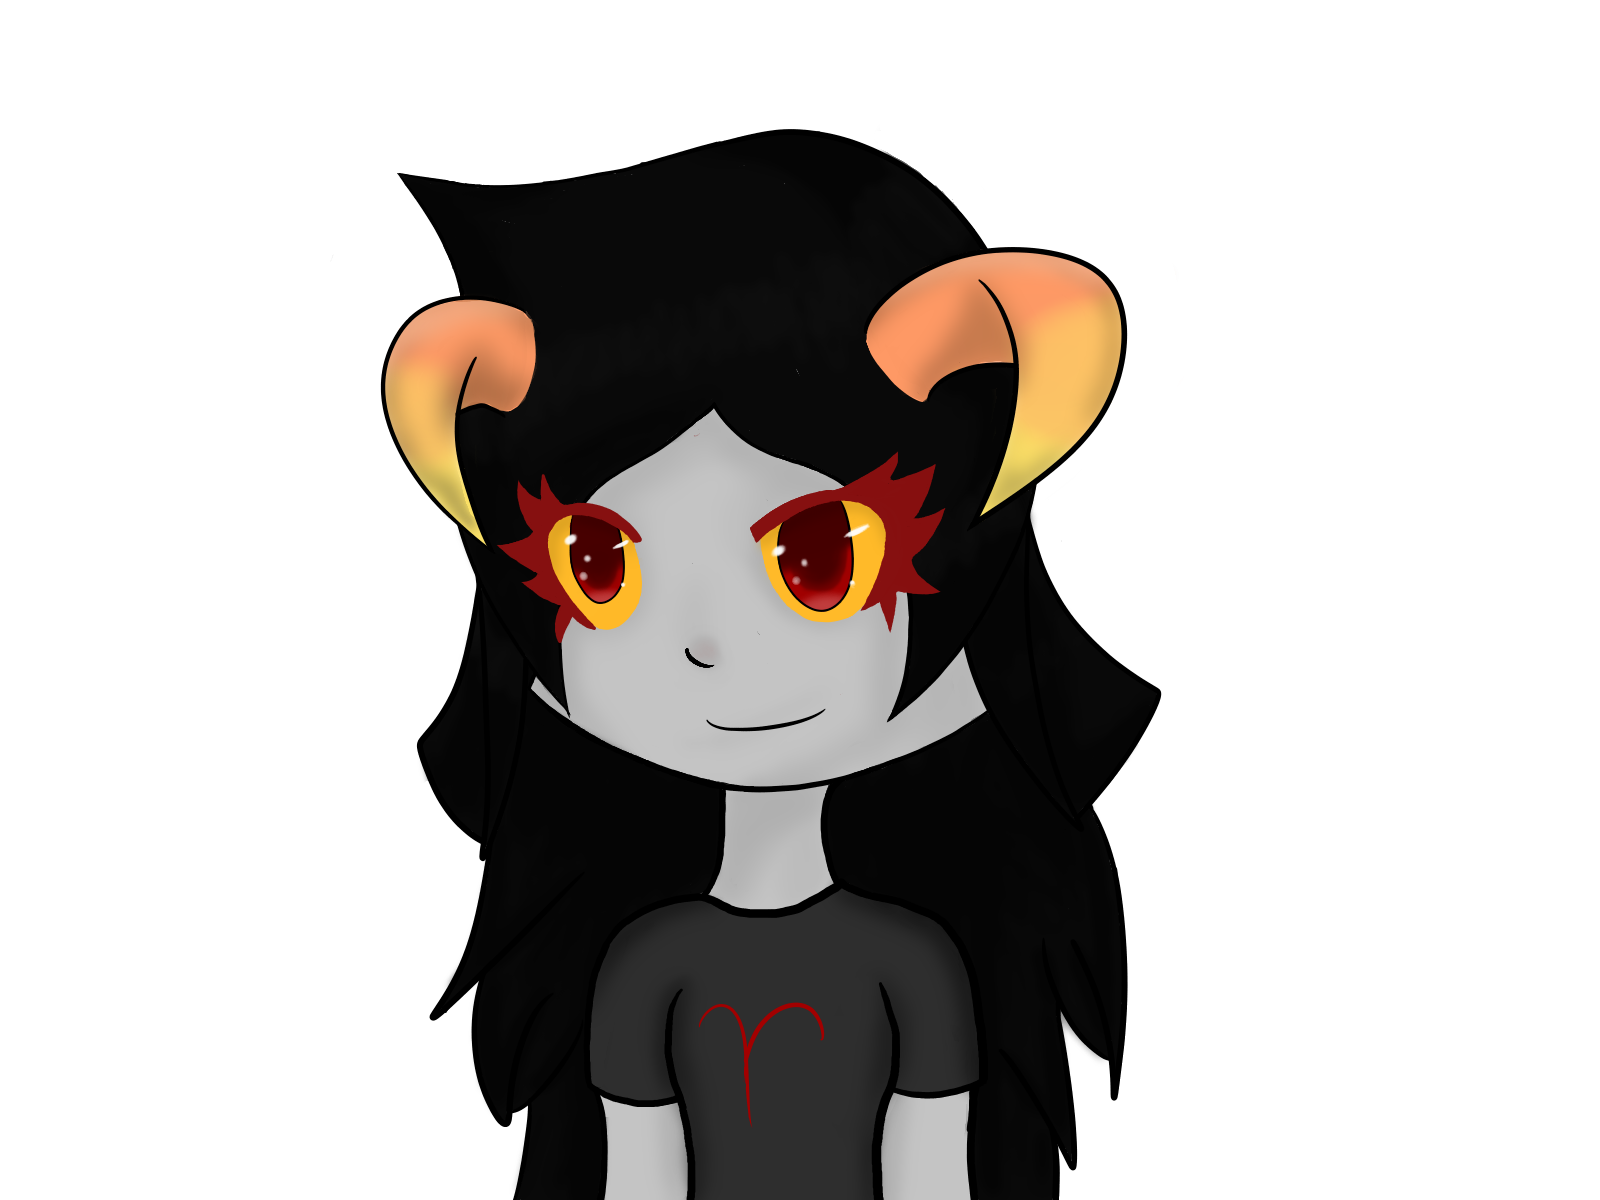 the_bab_by_aradia_exe-dabttwd.png